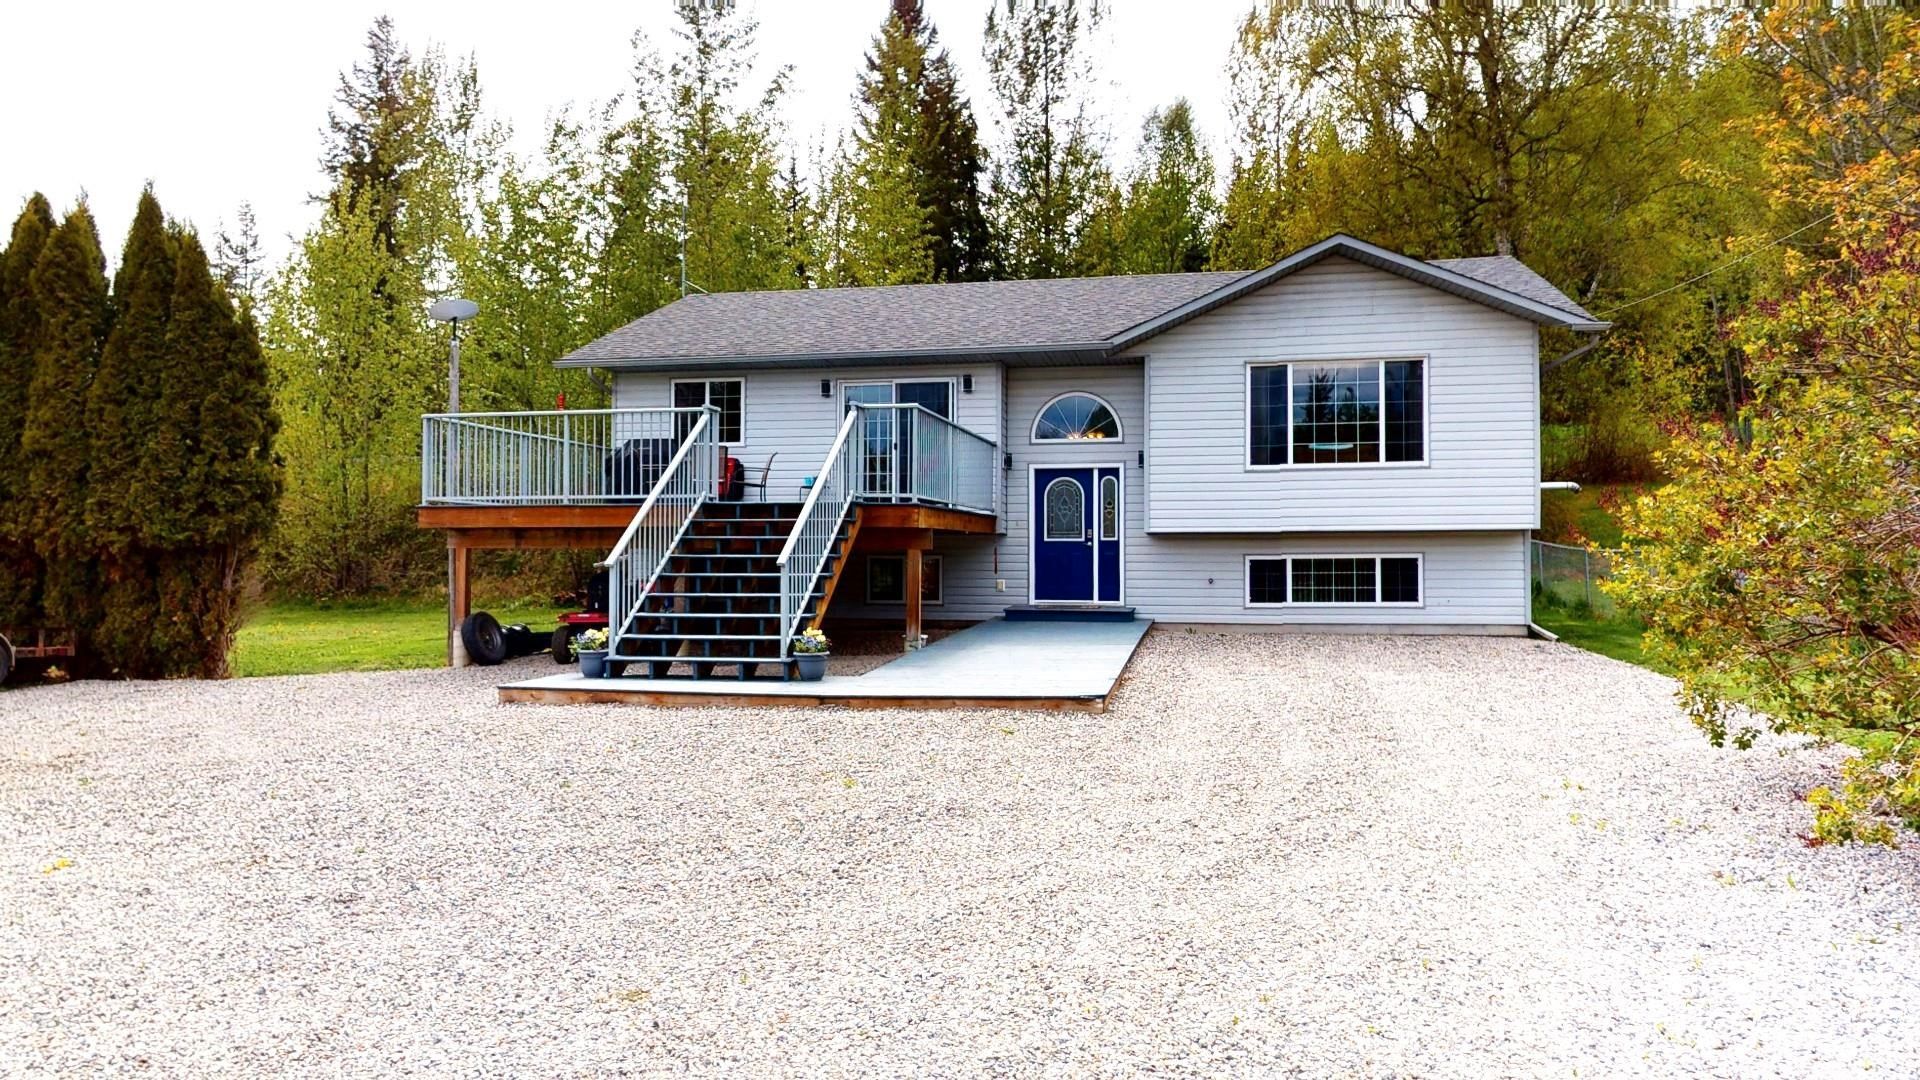 New property listed in Quesnel - Rural West, Quesnel (Zone 28)